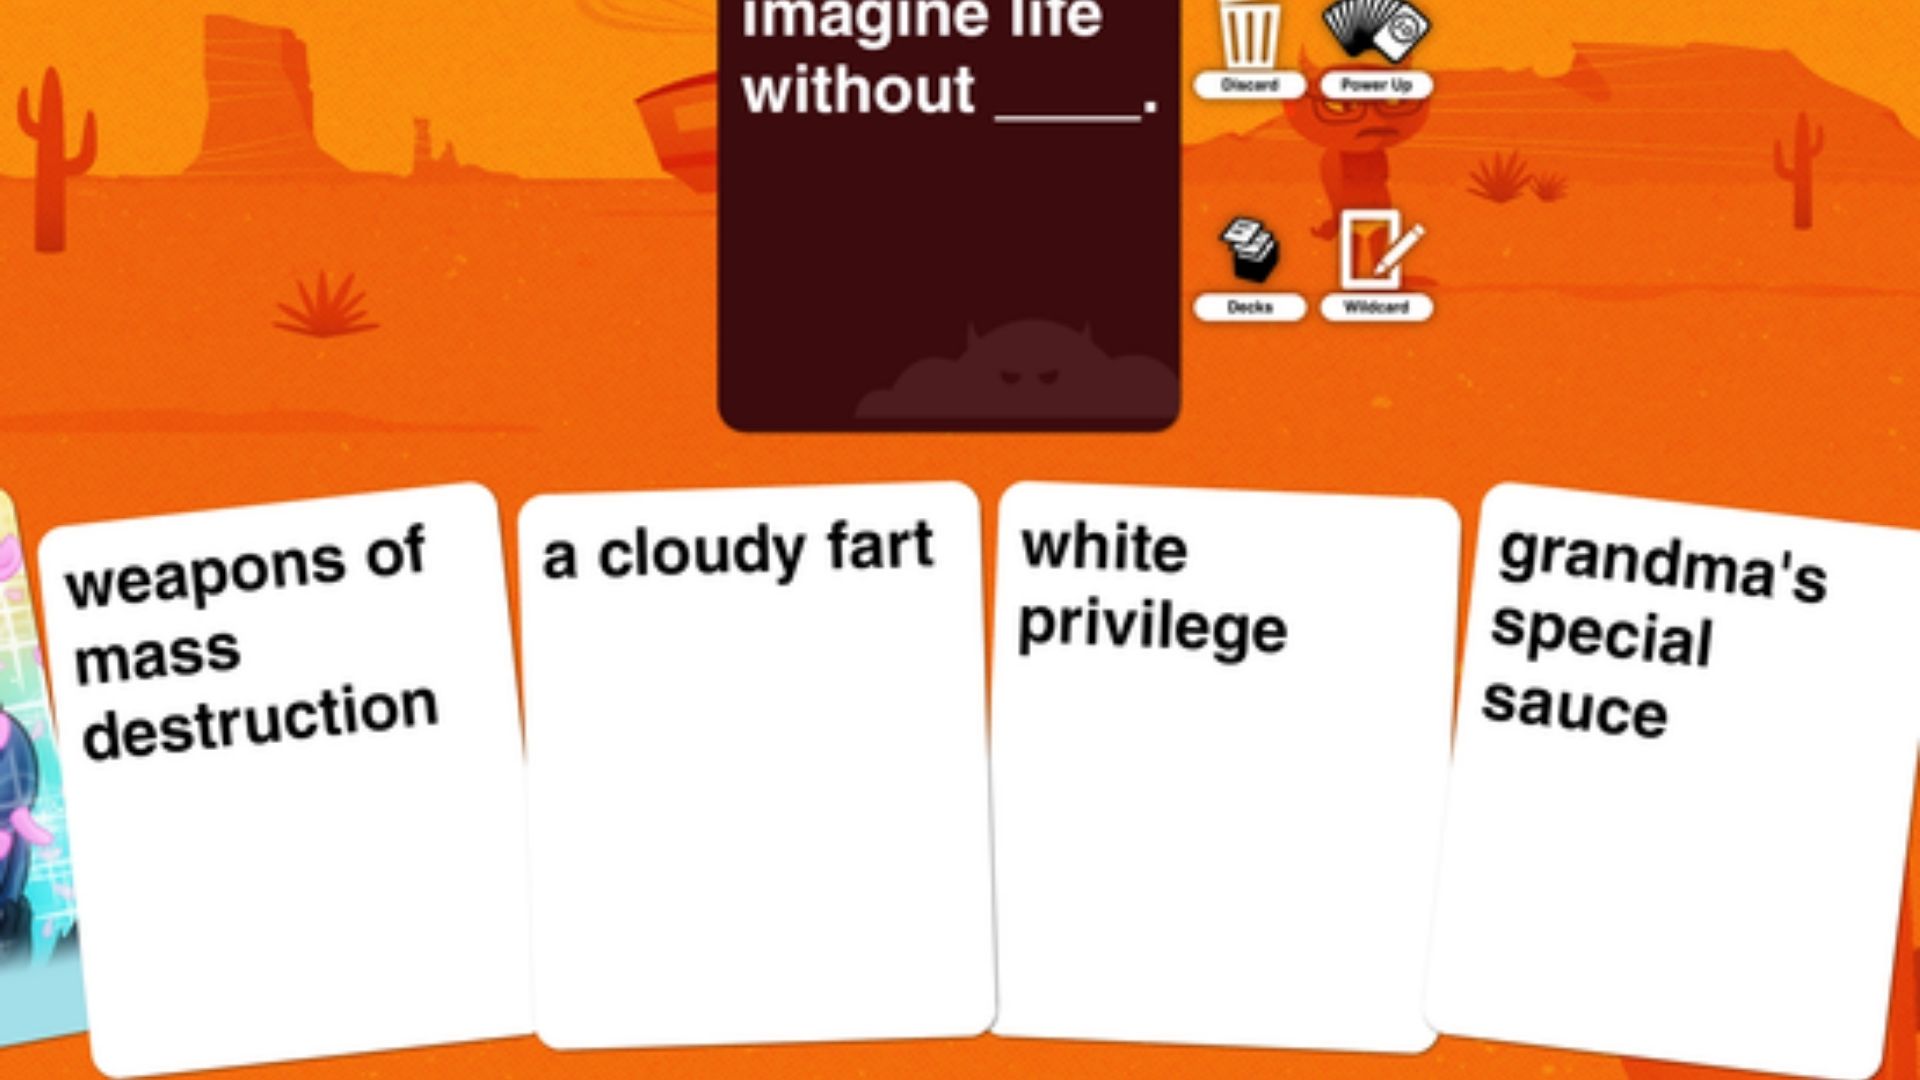 A screenshot from Evil Apples, a party game, showing four cards reading "weapons of mass destruction", "a cloudy fart", "white privilege", and "grandmas special sauce", below a prompt card reading "Imagine life without..."